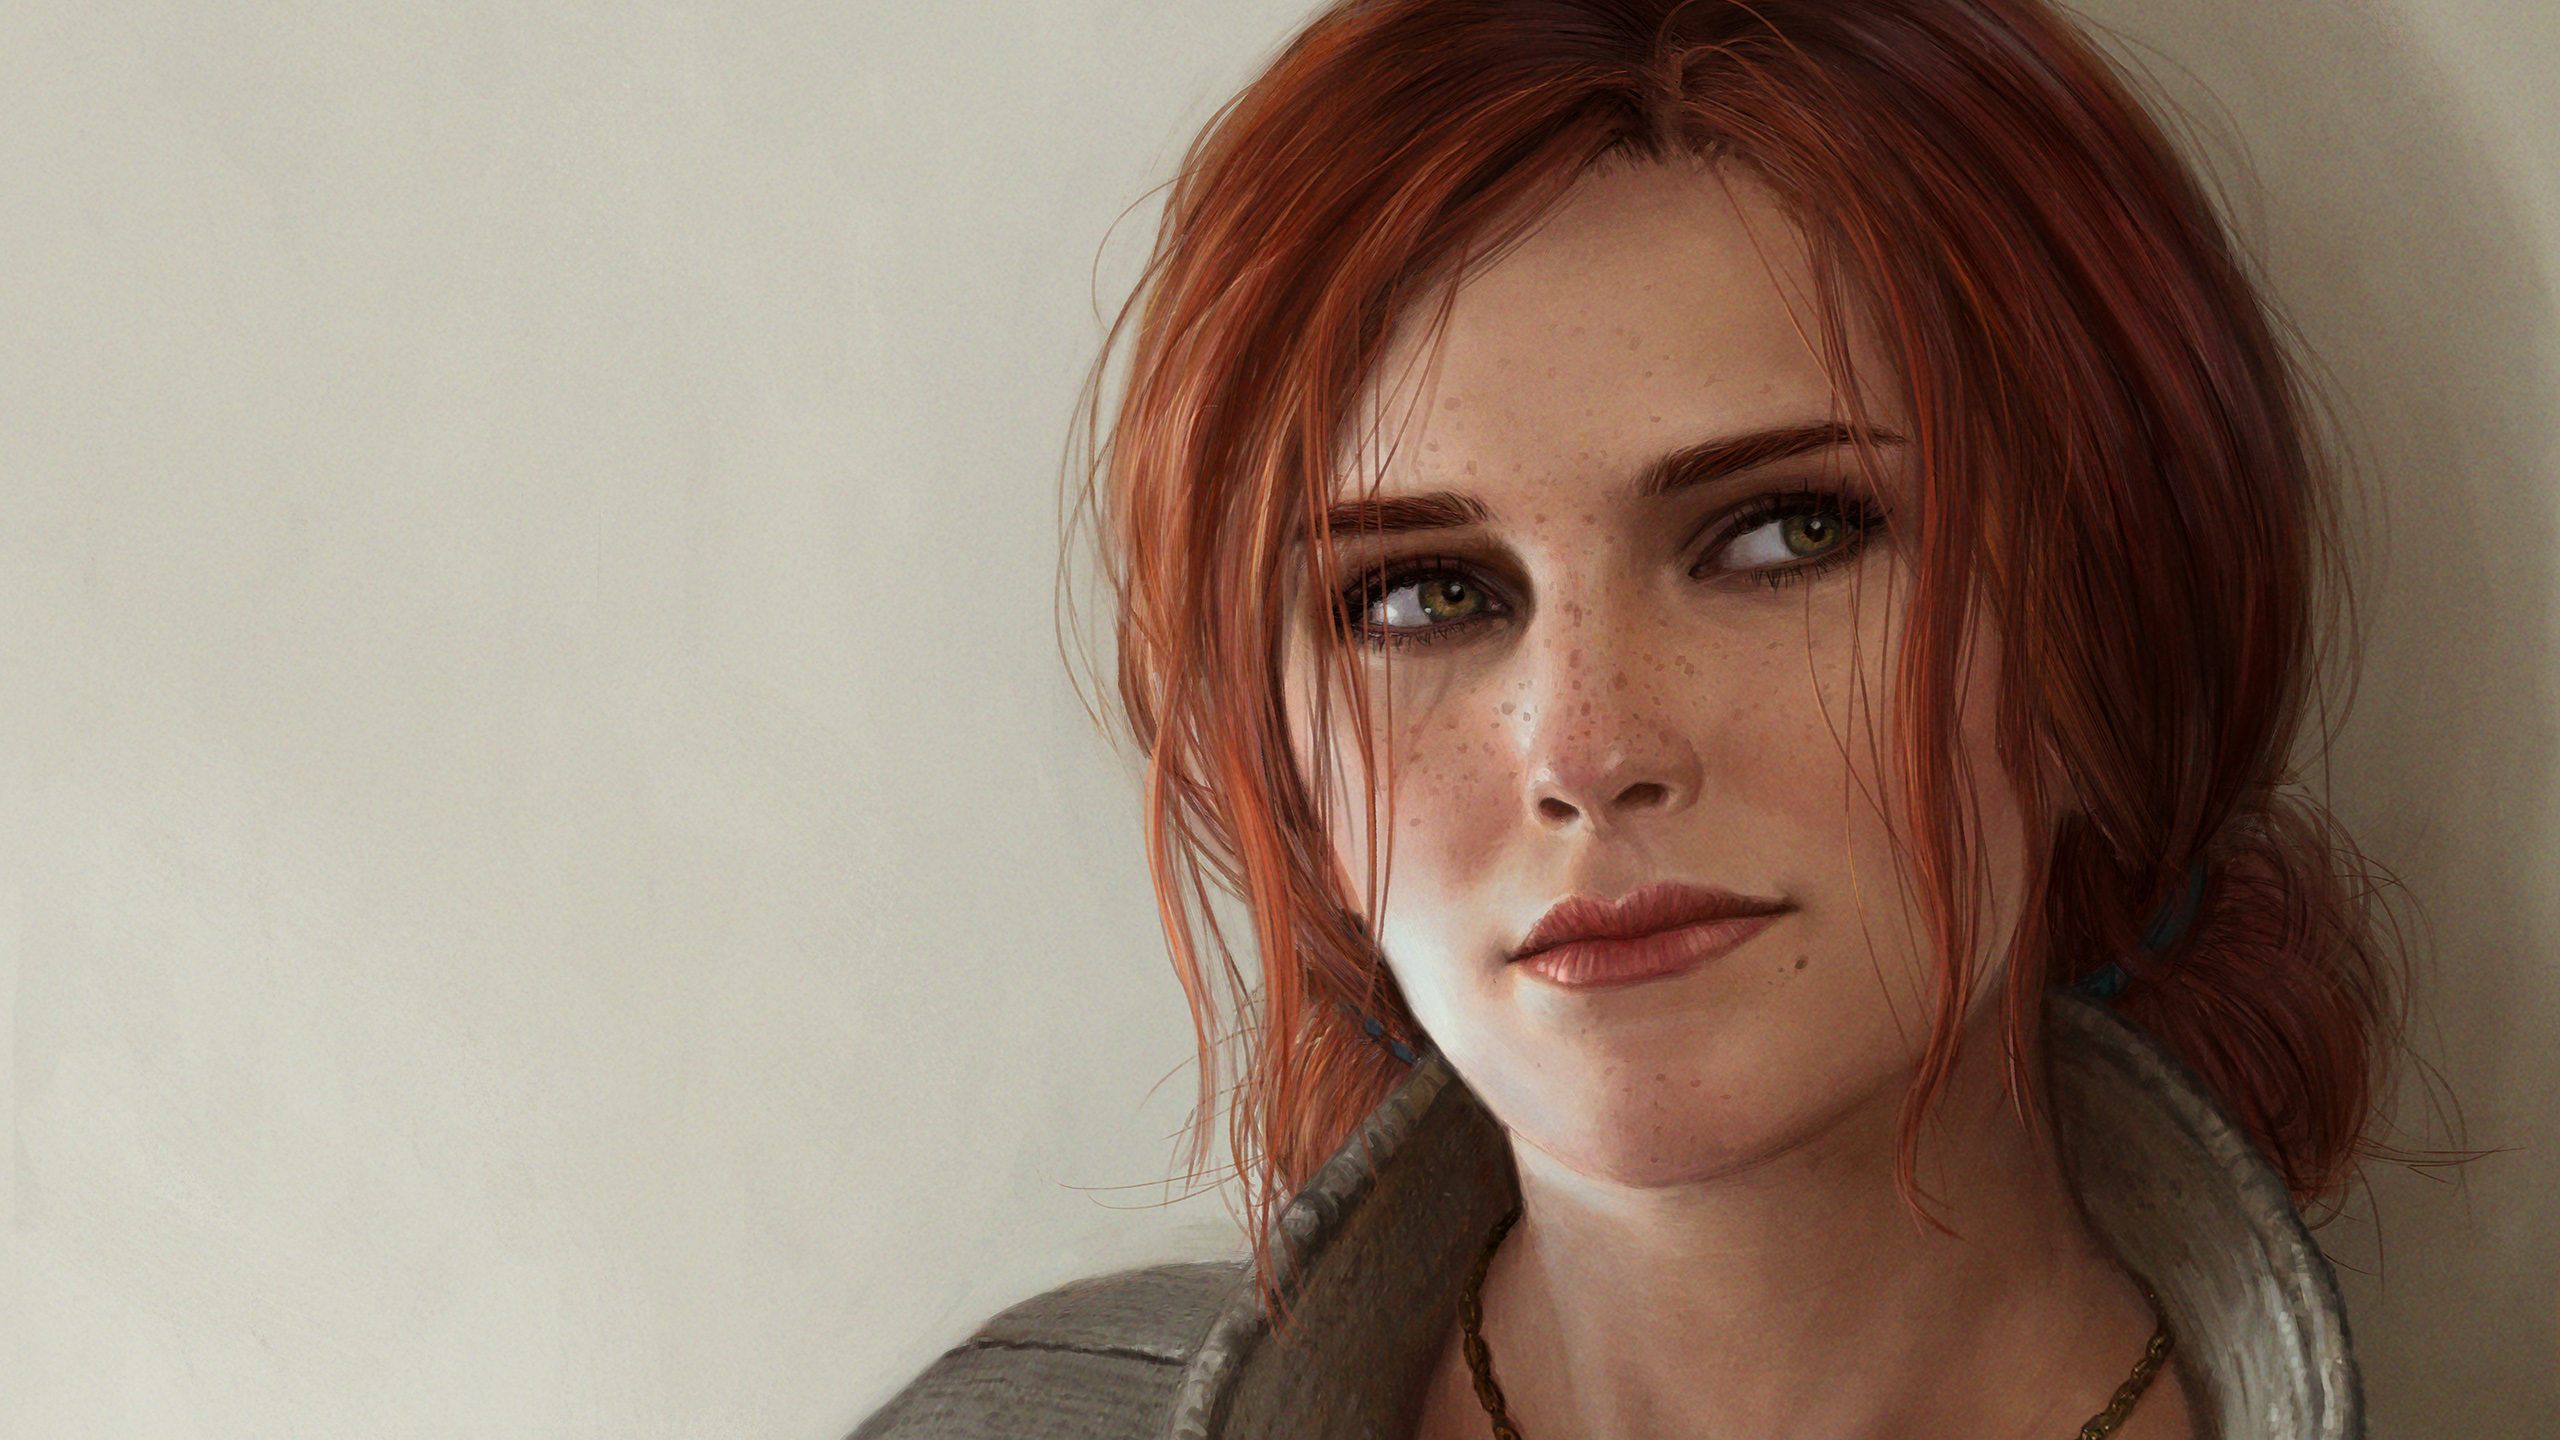 General 2560x1440 The Witcher The Witcher 3: Wild Hunt women redhead Triss Merigold looking away freckles video games drawing sorceress